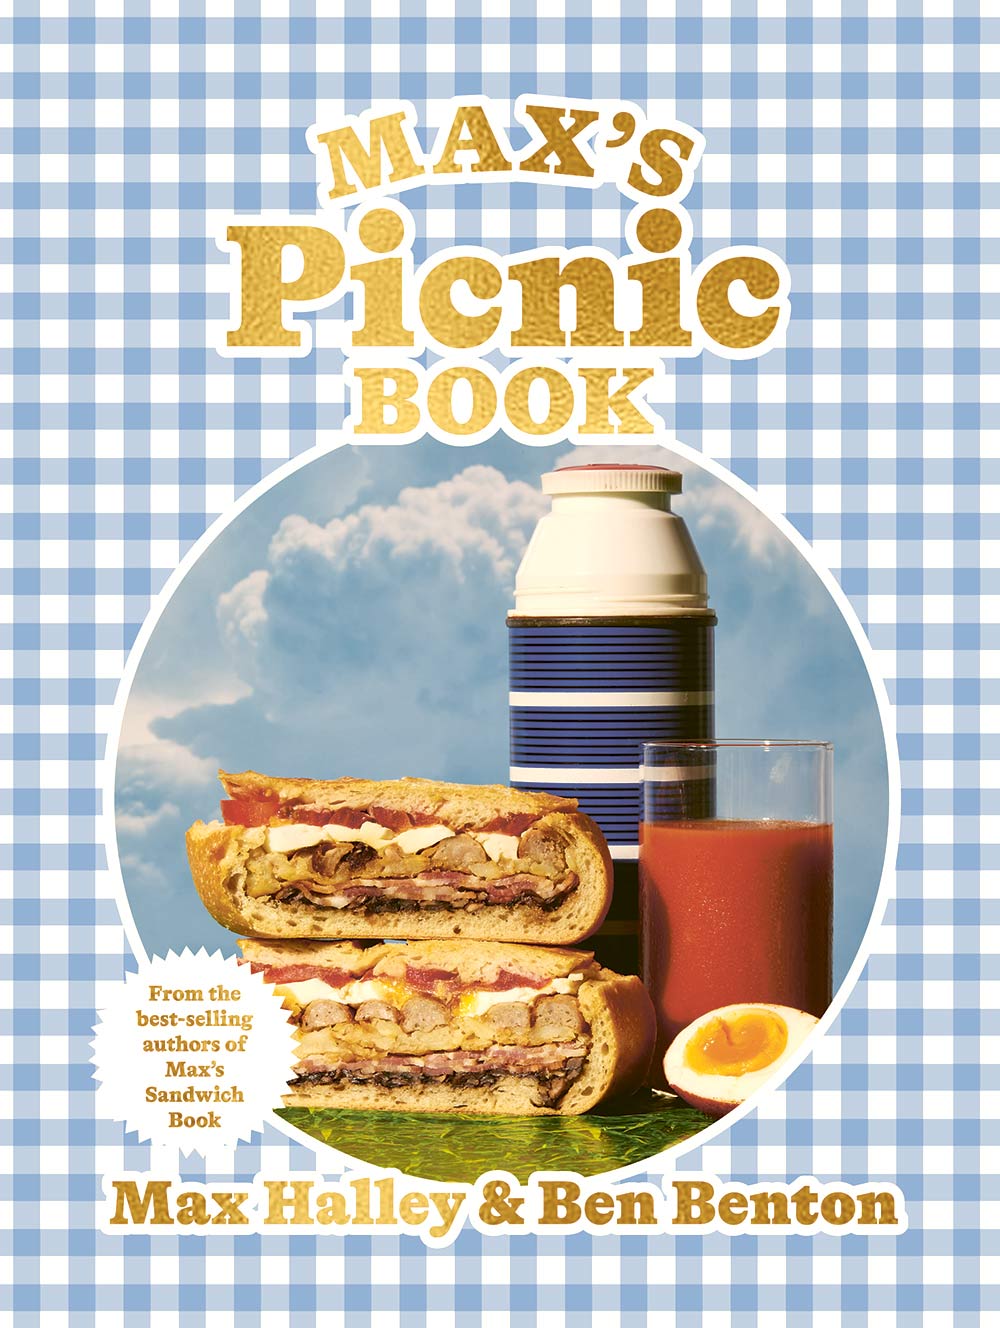 Max's Picnic Book by Max Halley